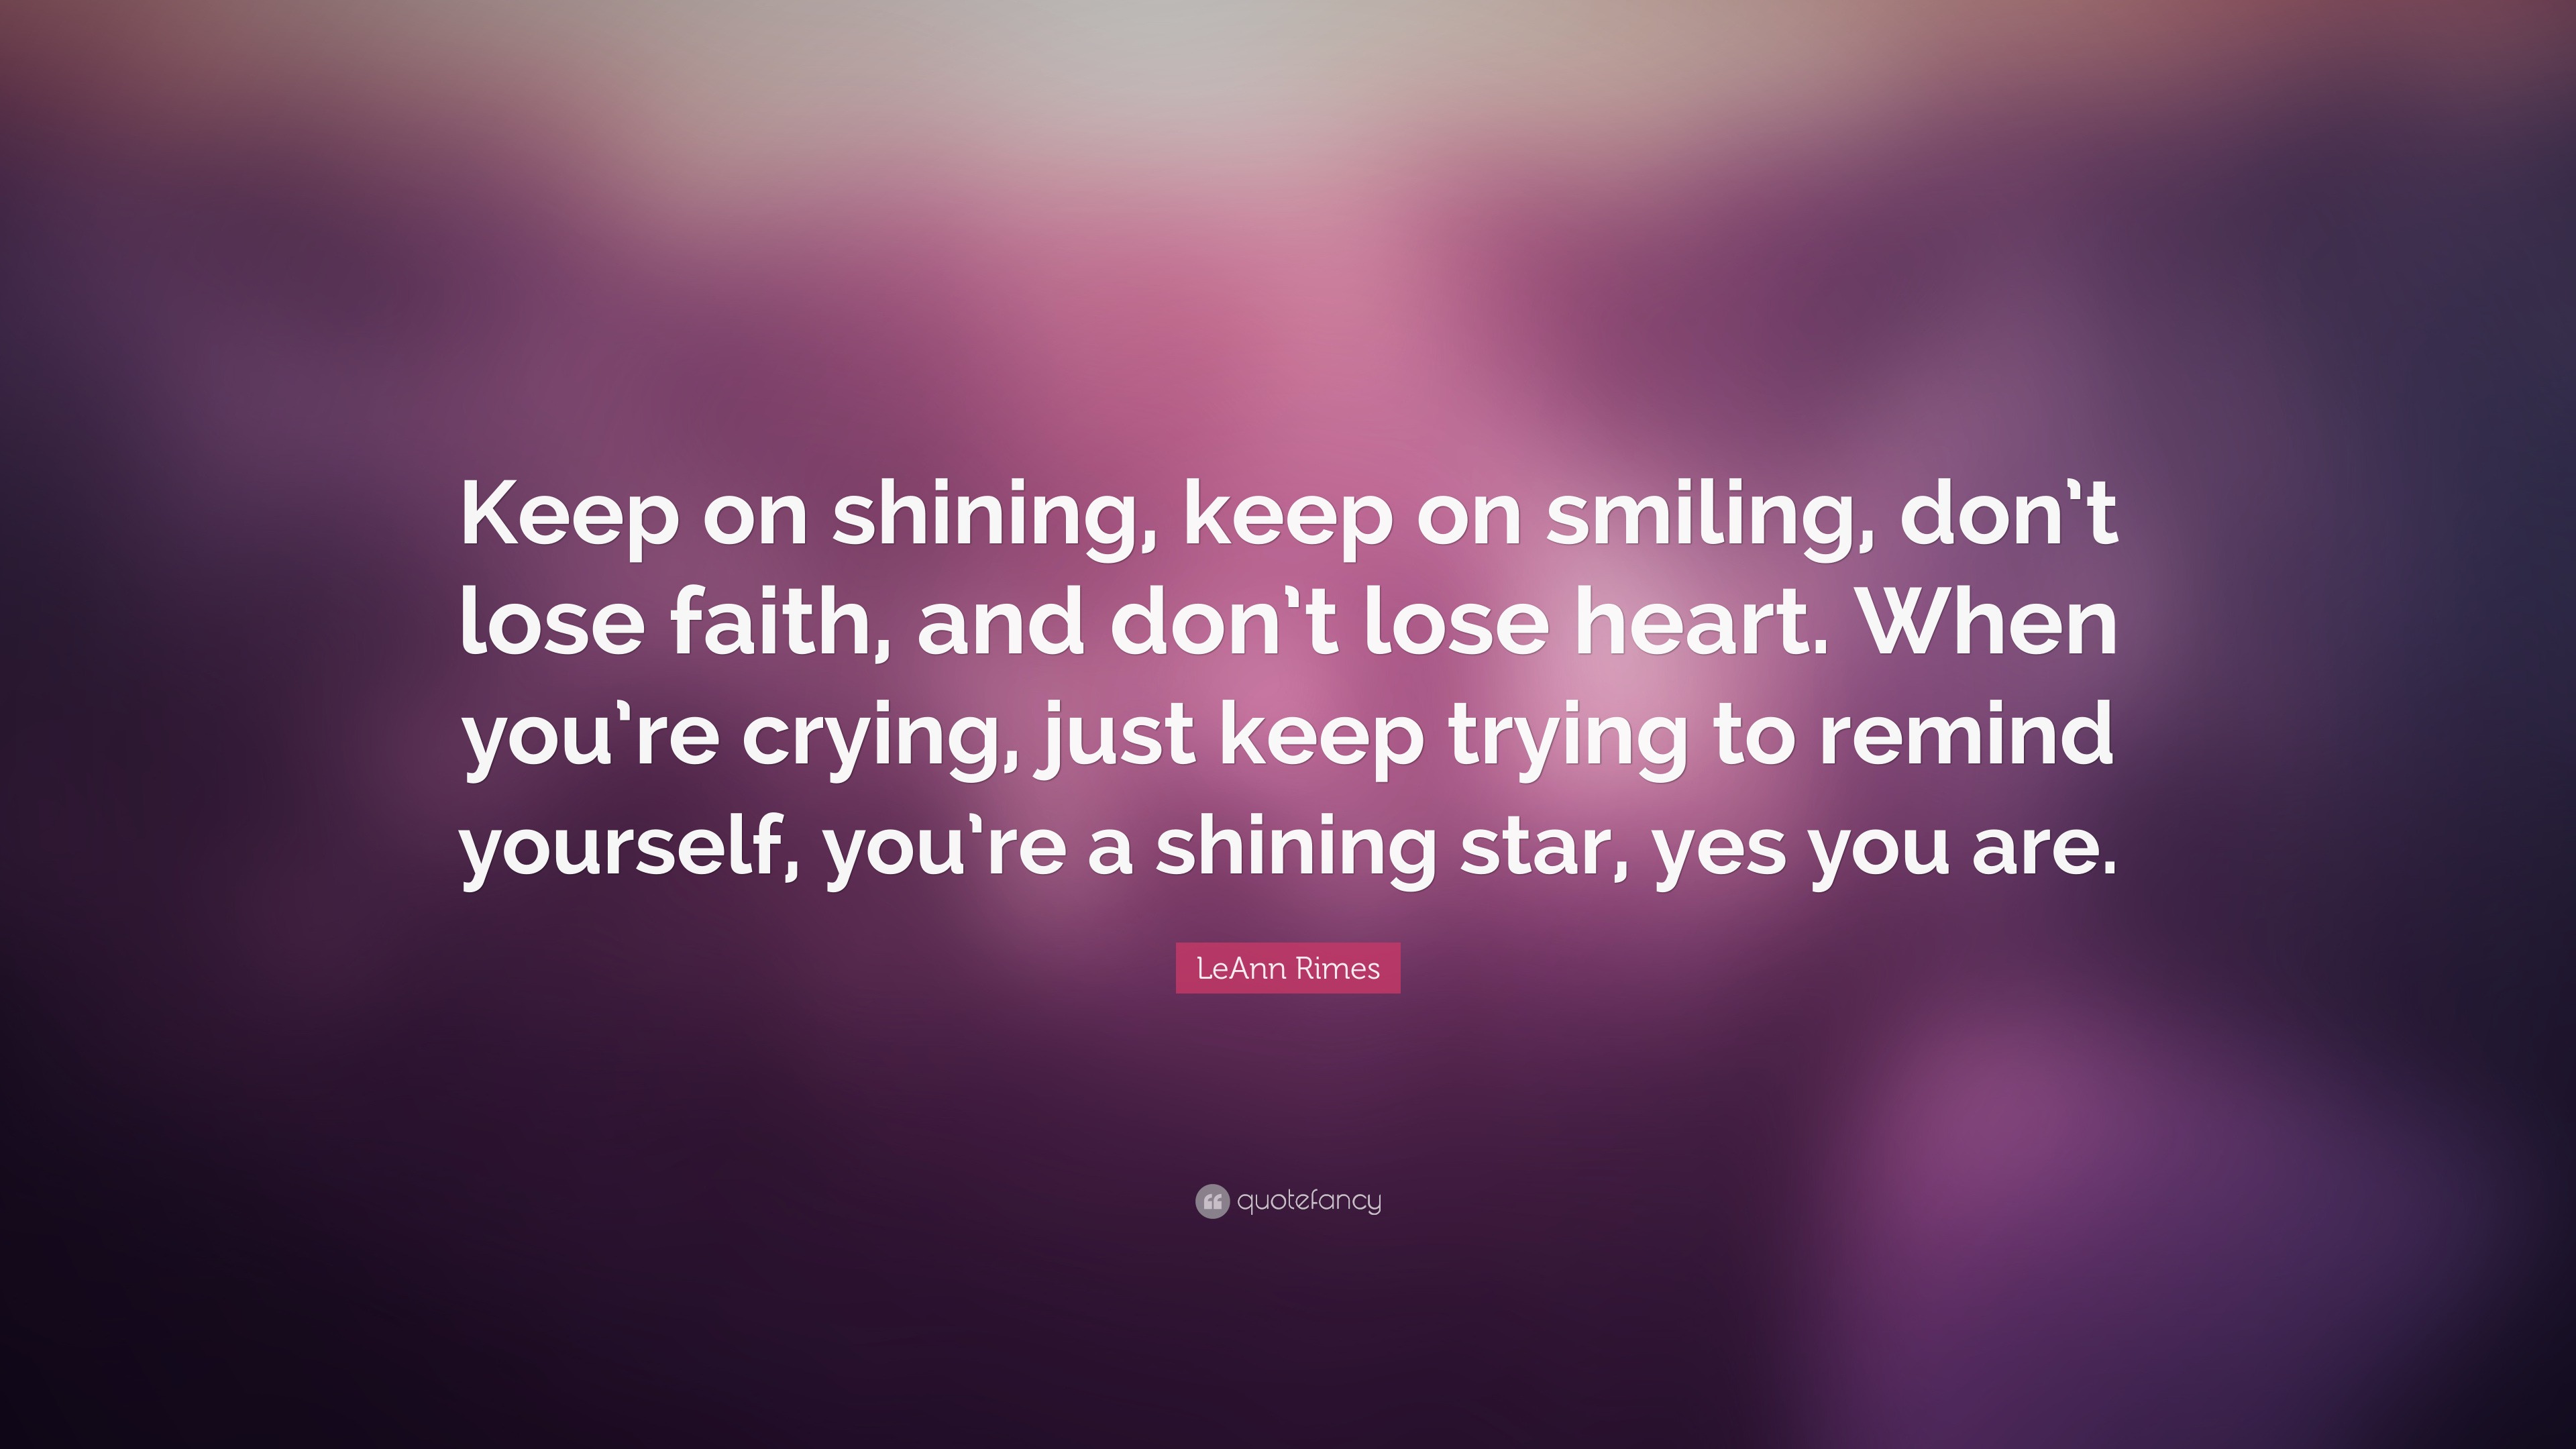 Leann Rimes Quote Keep On Shining Keep On Smiling Don T Lose Faith And Don T Lose Heart When You Re Crying Just Keep Trying To Remind